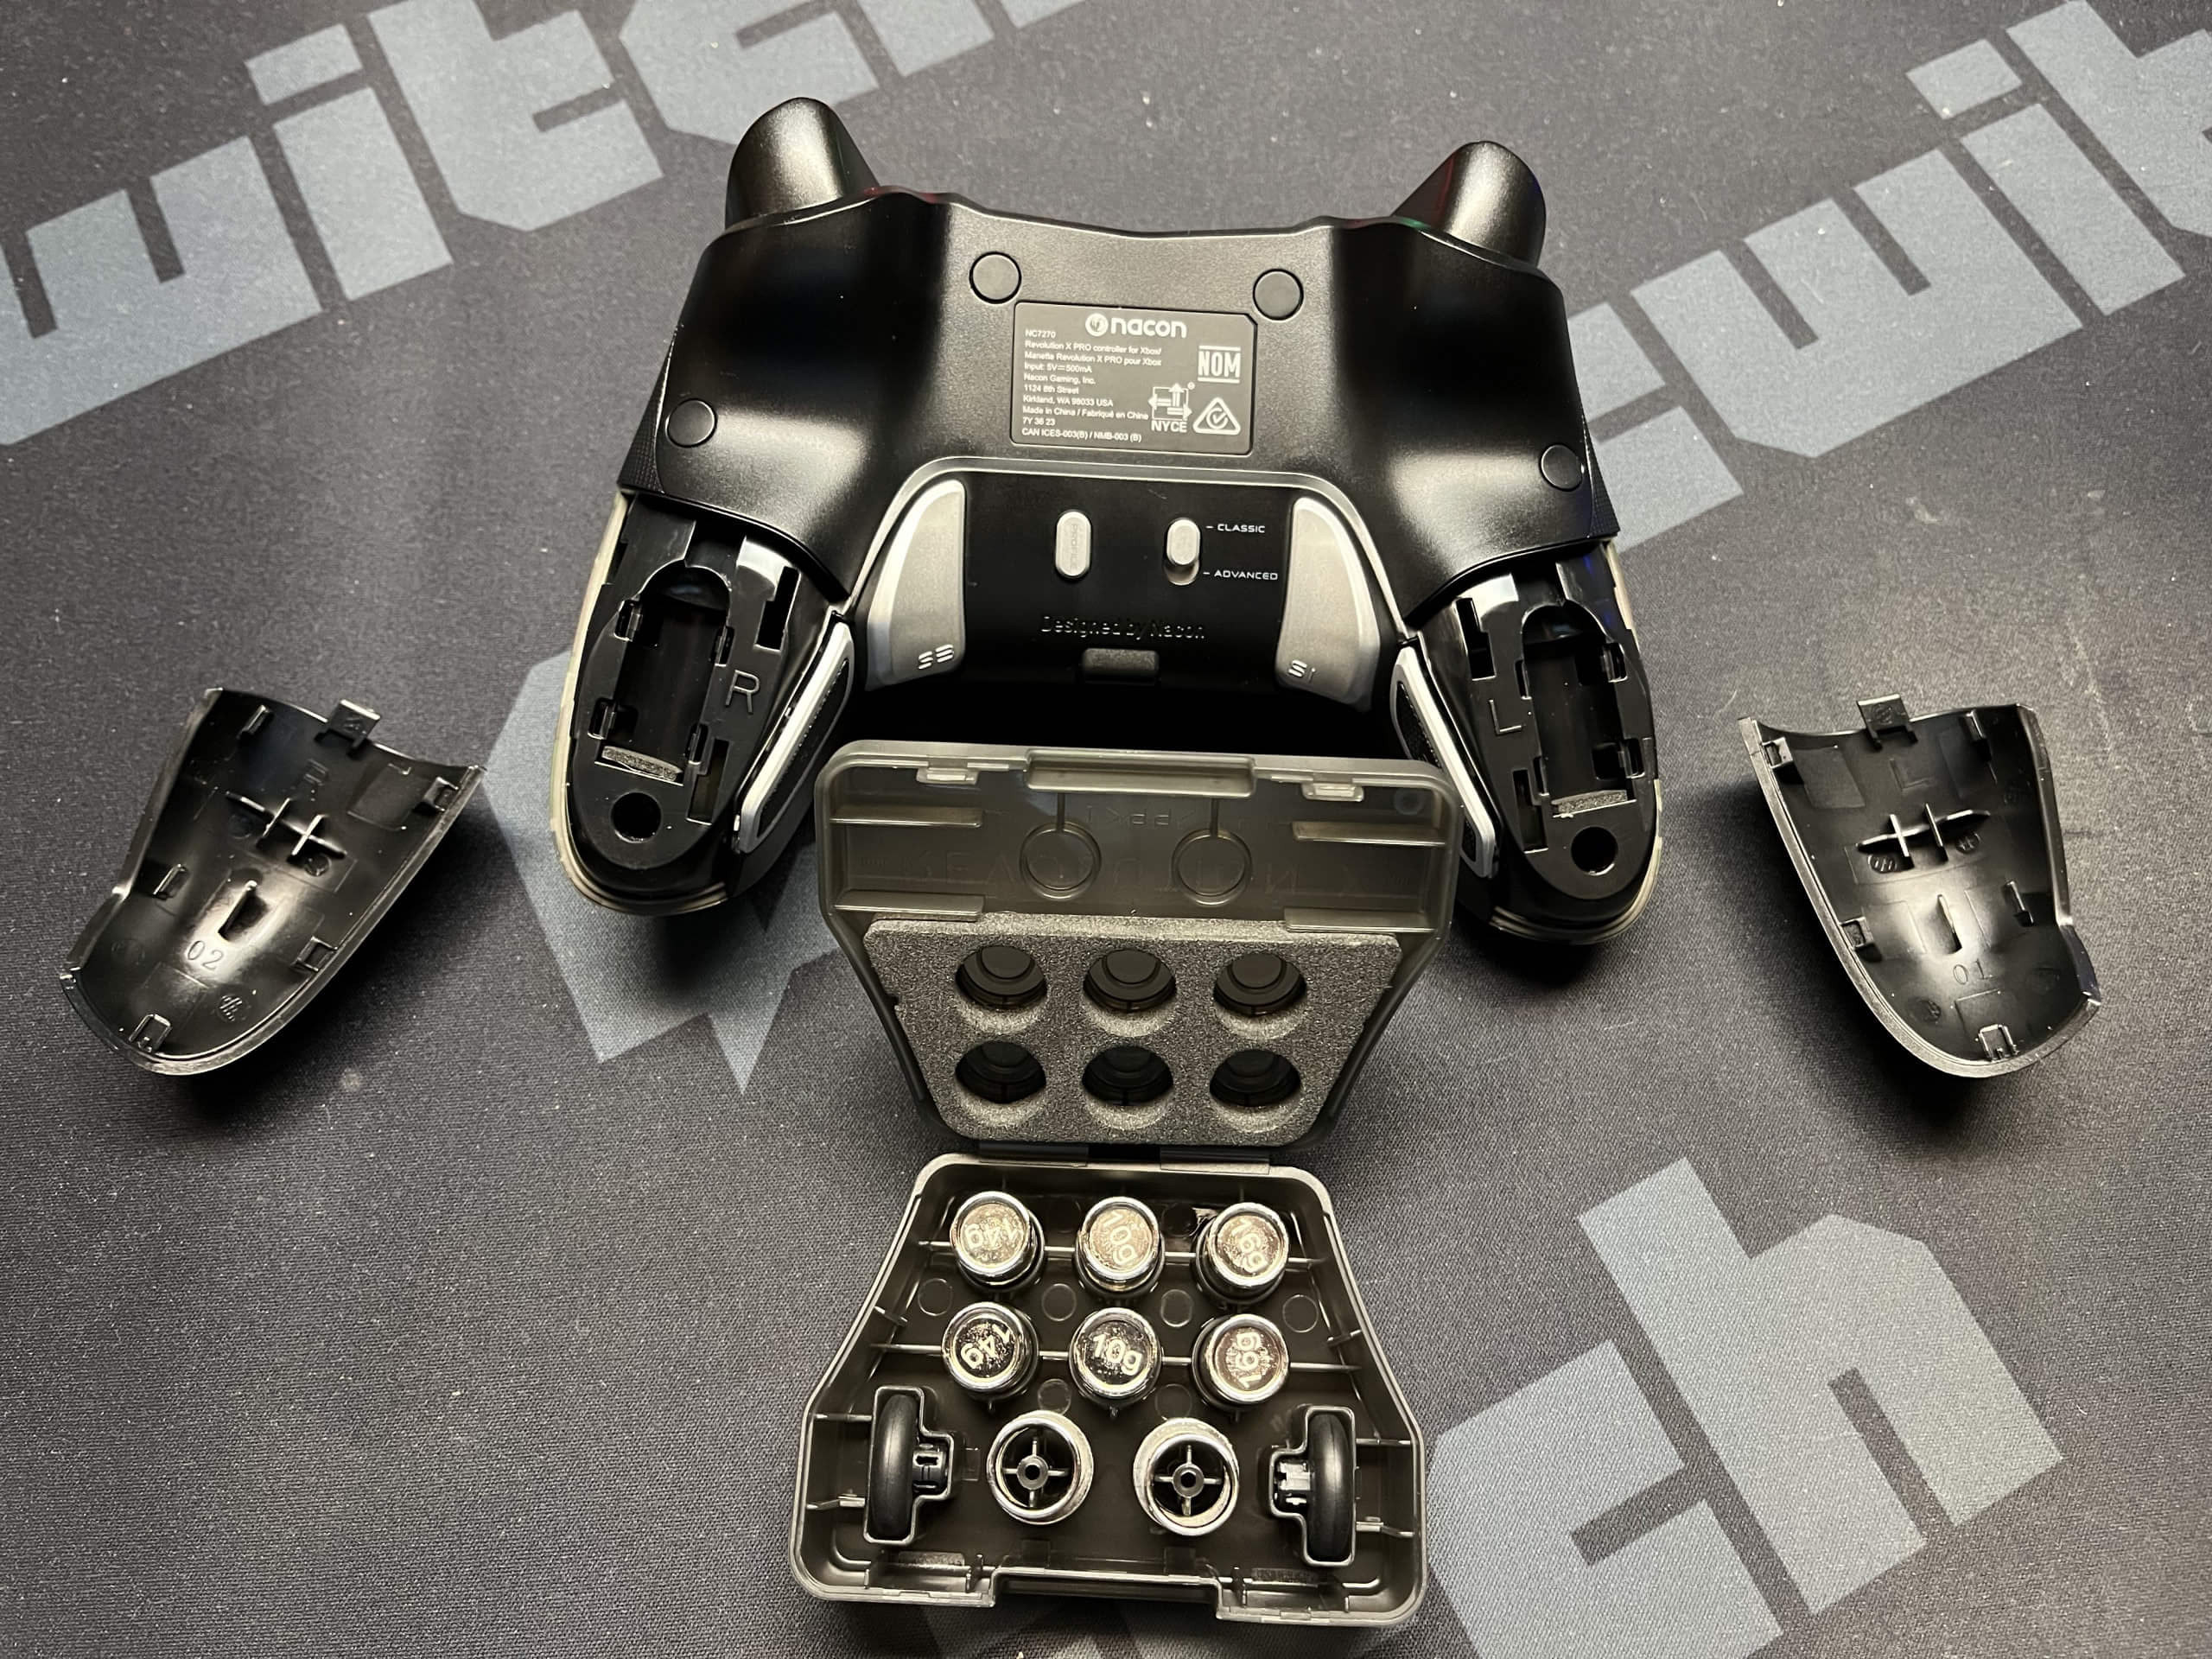 Weights are exchanged on the back side of the Revolution X Pro. The back side of the controller with the two handhold parts open. A small box with the exchangeable weights, thumbsticks, and posts is shown as well.